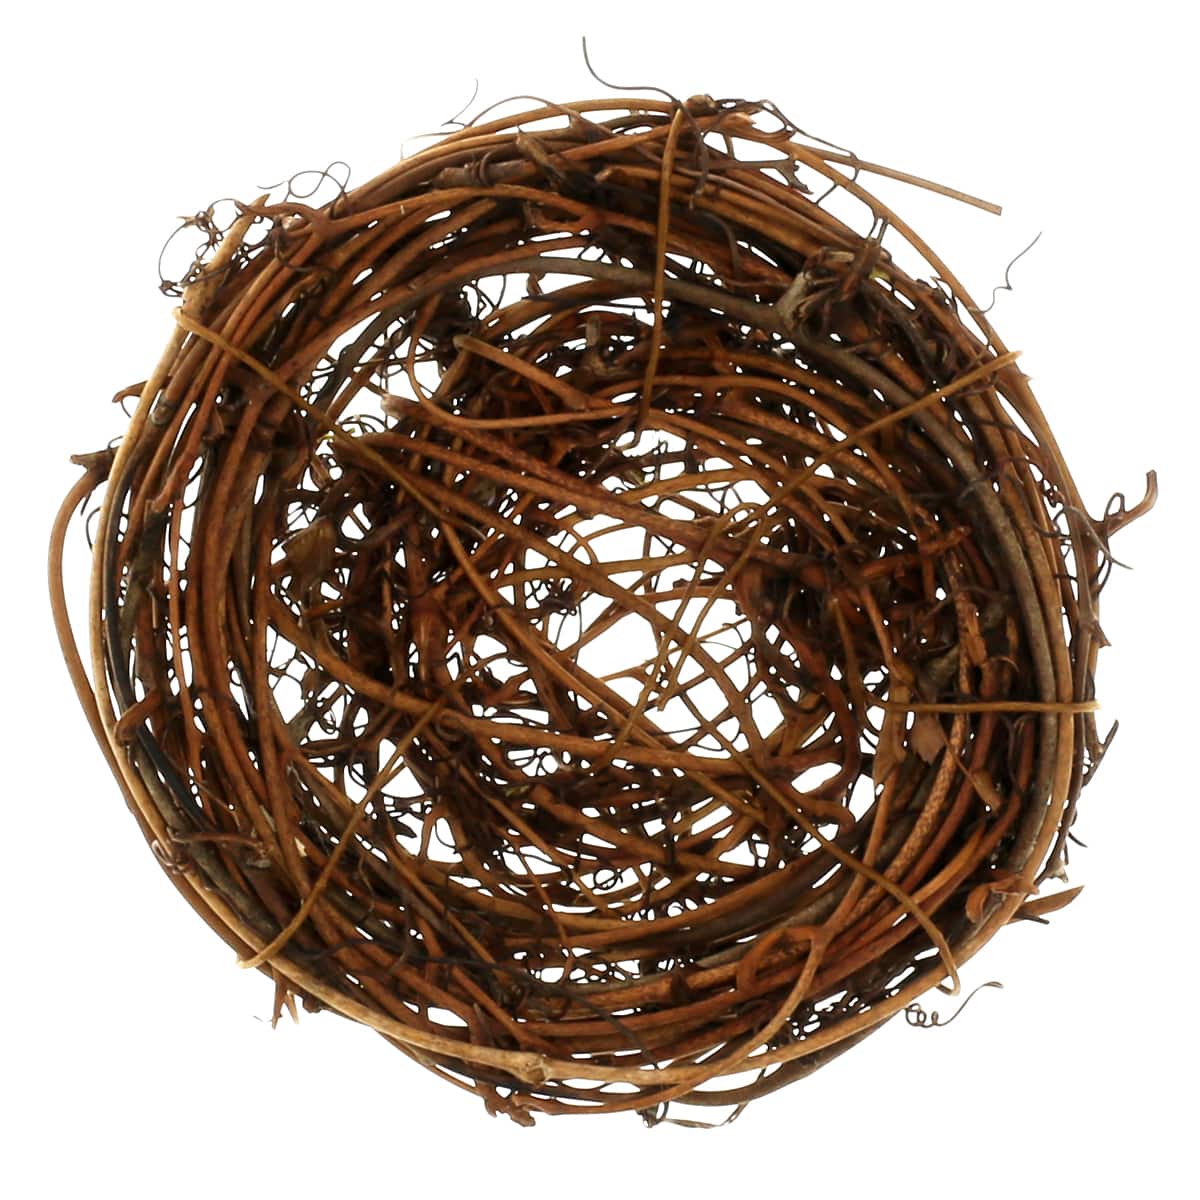 Buy the Small Bird Nest by Panacea™ at Michaels